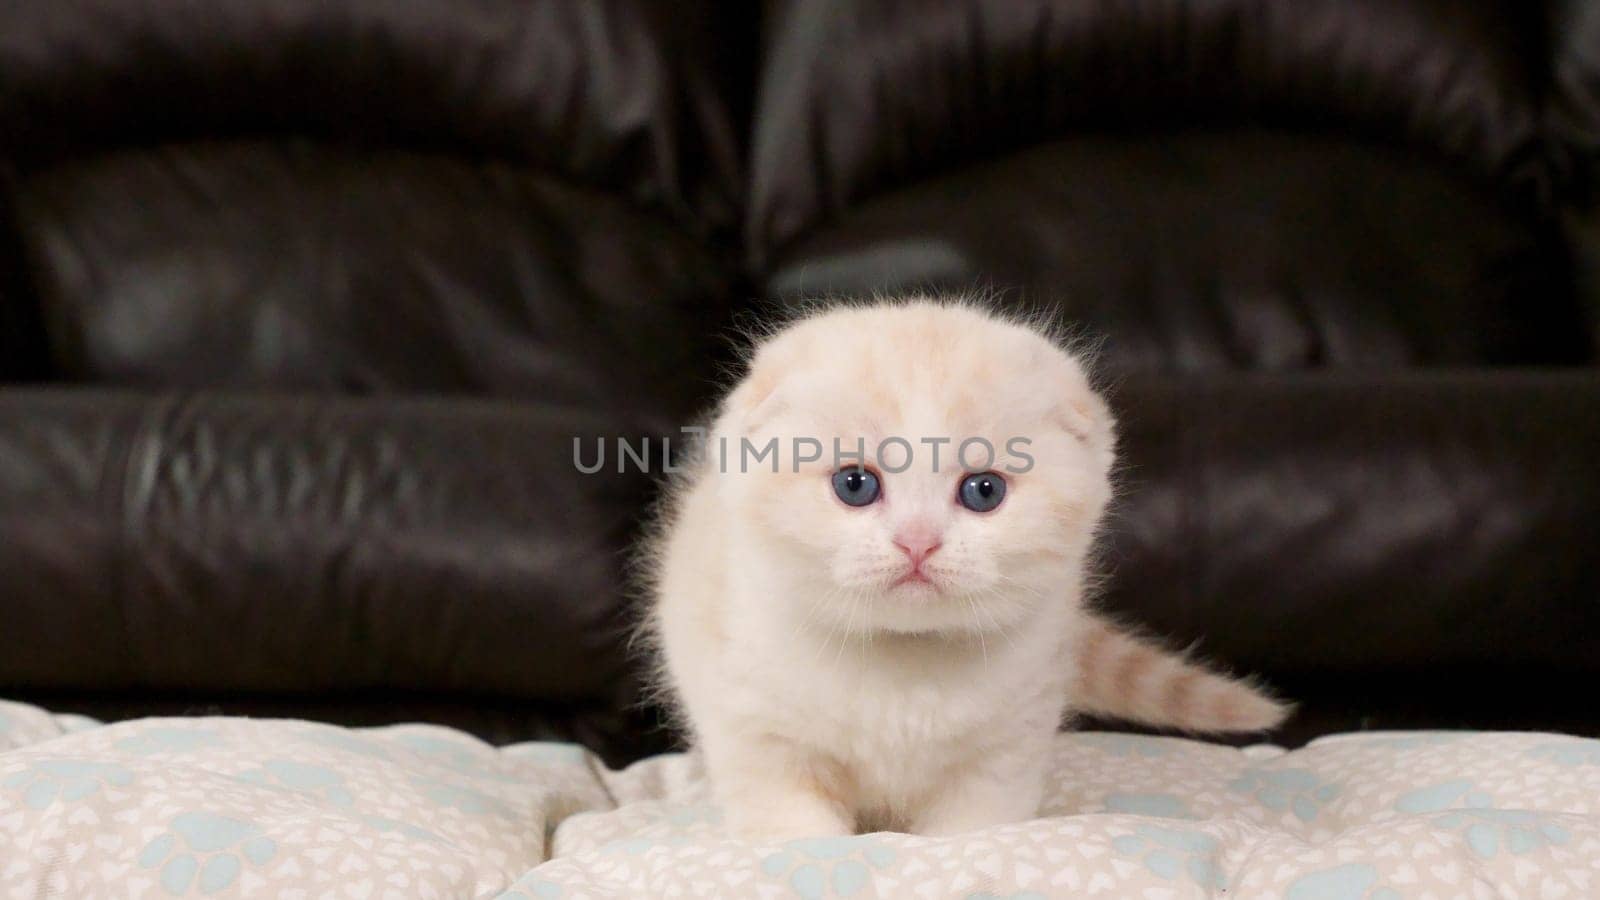 Fluffy cream Scottish fold kitten looking at camera on brown background, front view, space for text. Cute young shorthair white cat with blue eyes